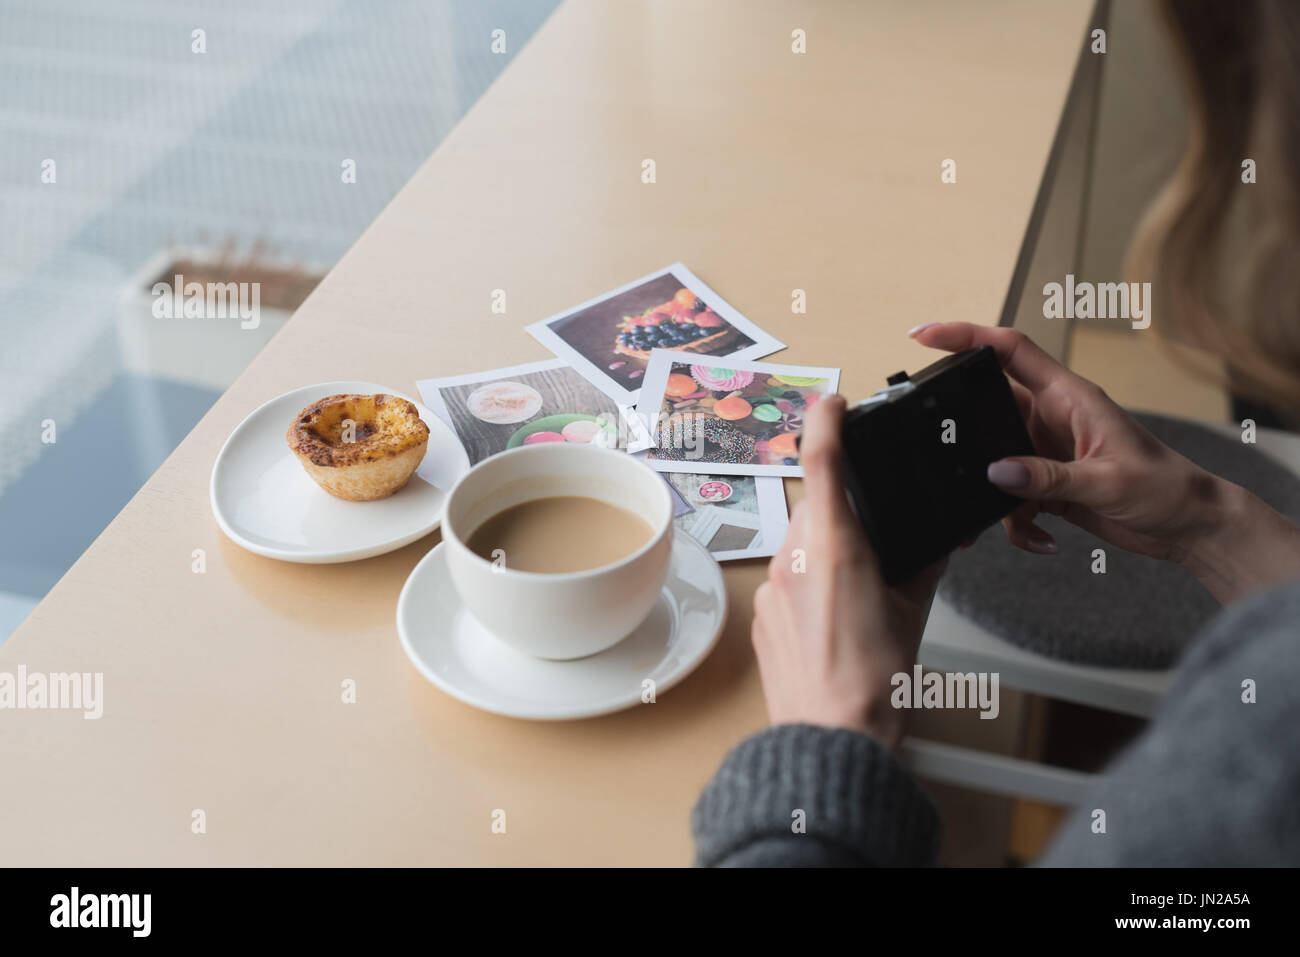 Cropped image of woman photographing coffee by cupcake and photographs on table in cafe Stock Photo